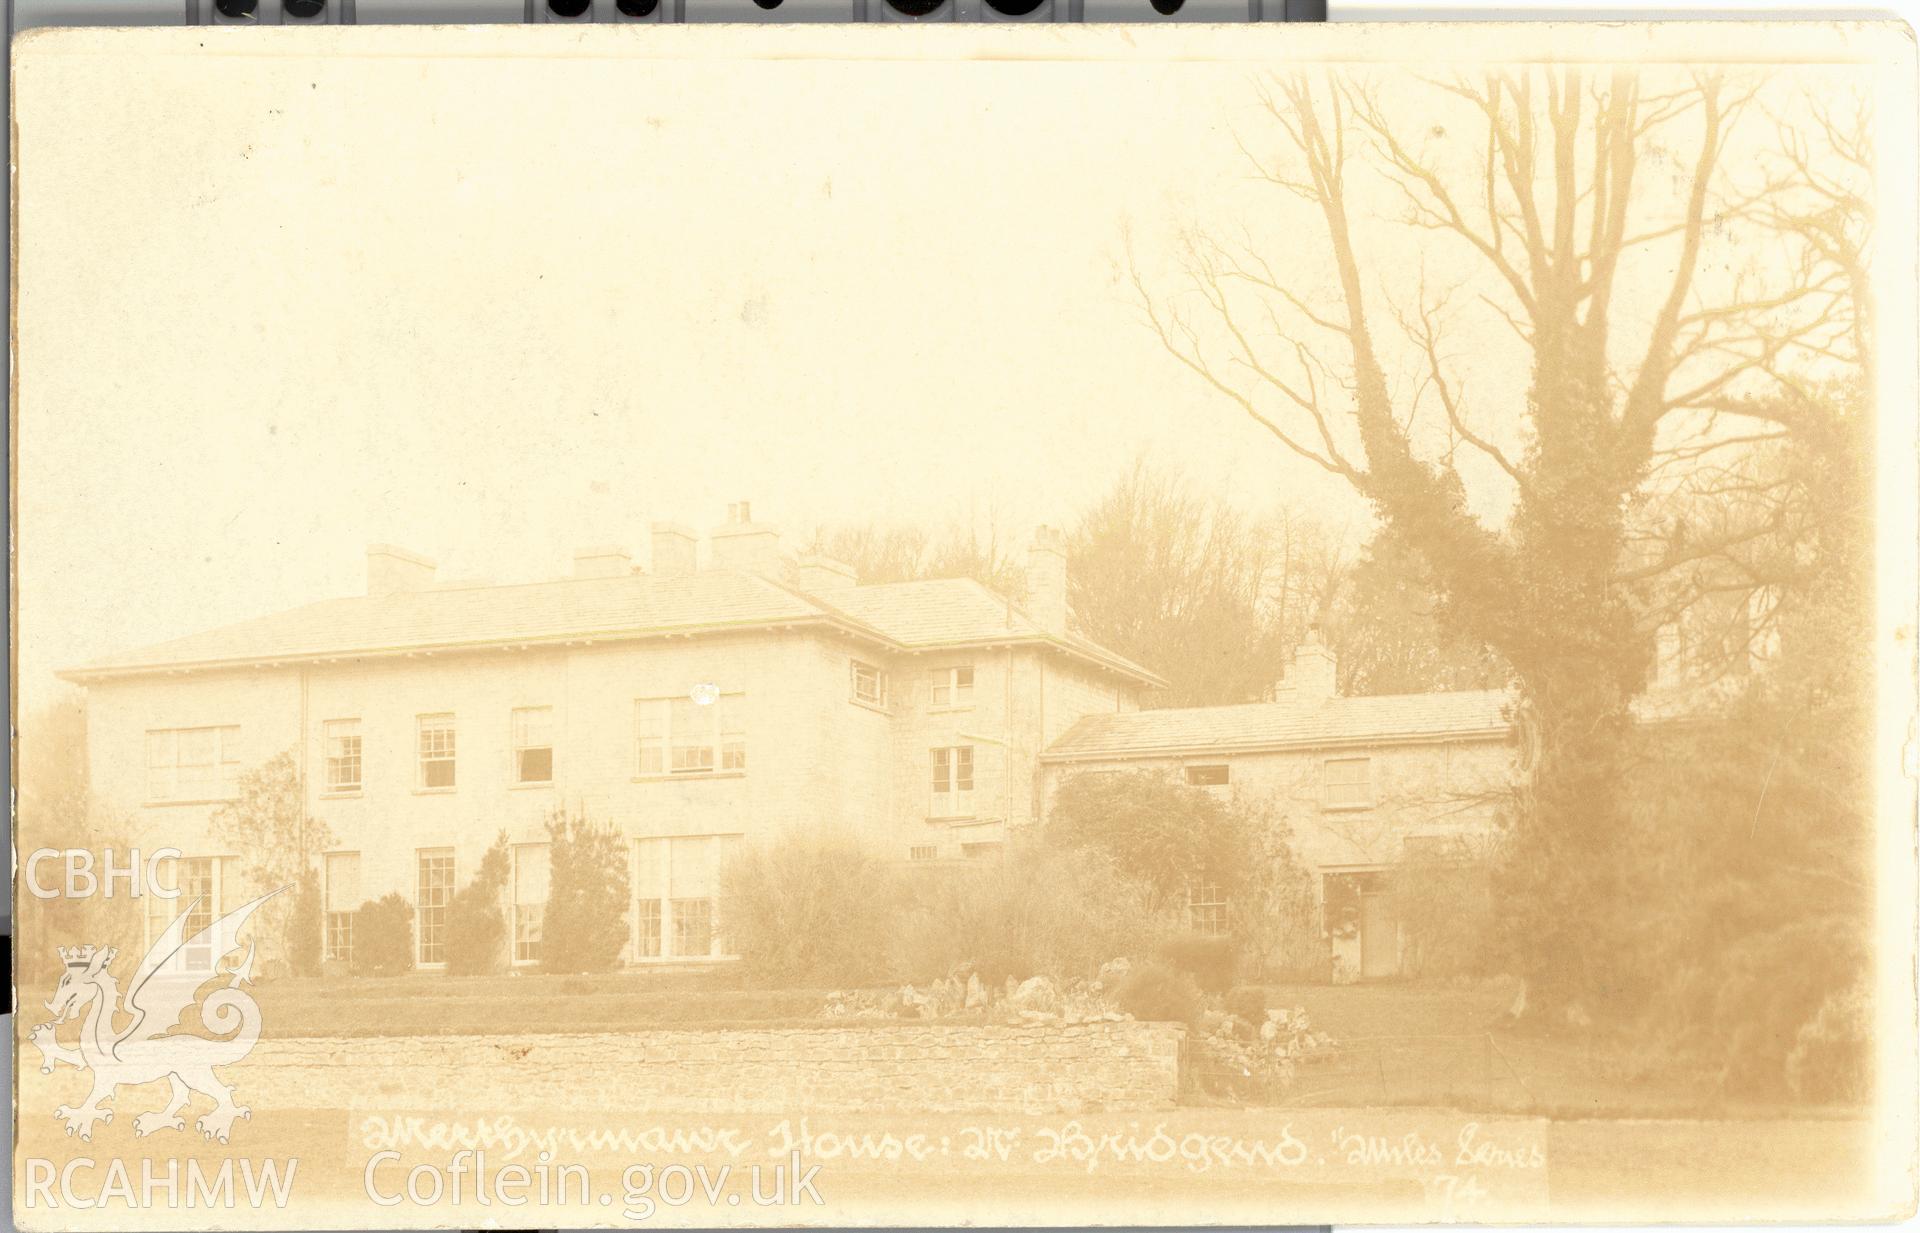 Digitised postcard image of Merthyr Mawr House, Merthyr Mawr, the Miles Series, Ewenny Road Studio, Bridgend. Produced by Parks and Gardens Data Services, from an original item in the Peter Davis Collection at Parks and Gardens UK. We hold only web-resolution images of this collection, suitable for viewing on screen and for research purposes only. We do not hold the original images, or publication quality scans.